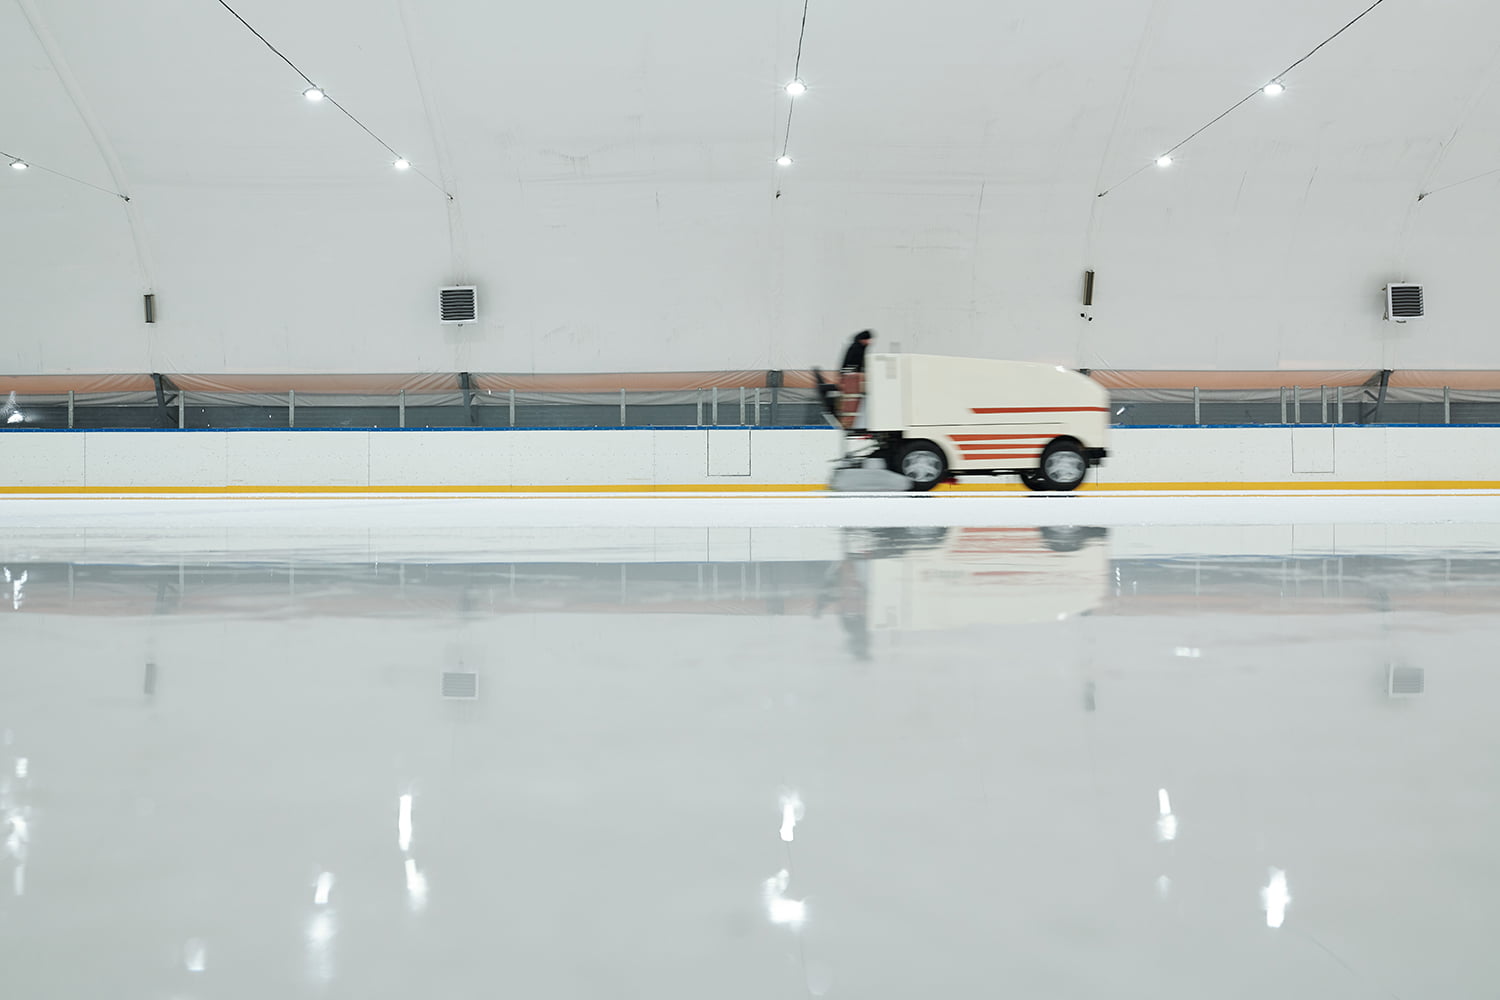 White truck or ice flattening machine moving along ice-rink while preparing it for playing hockey or skating inside large sports center